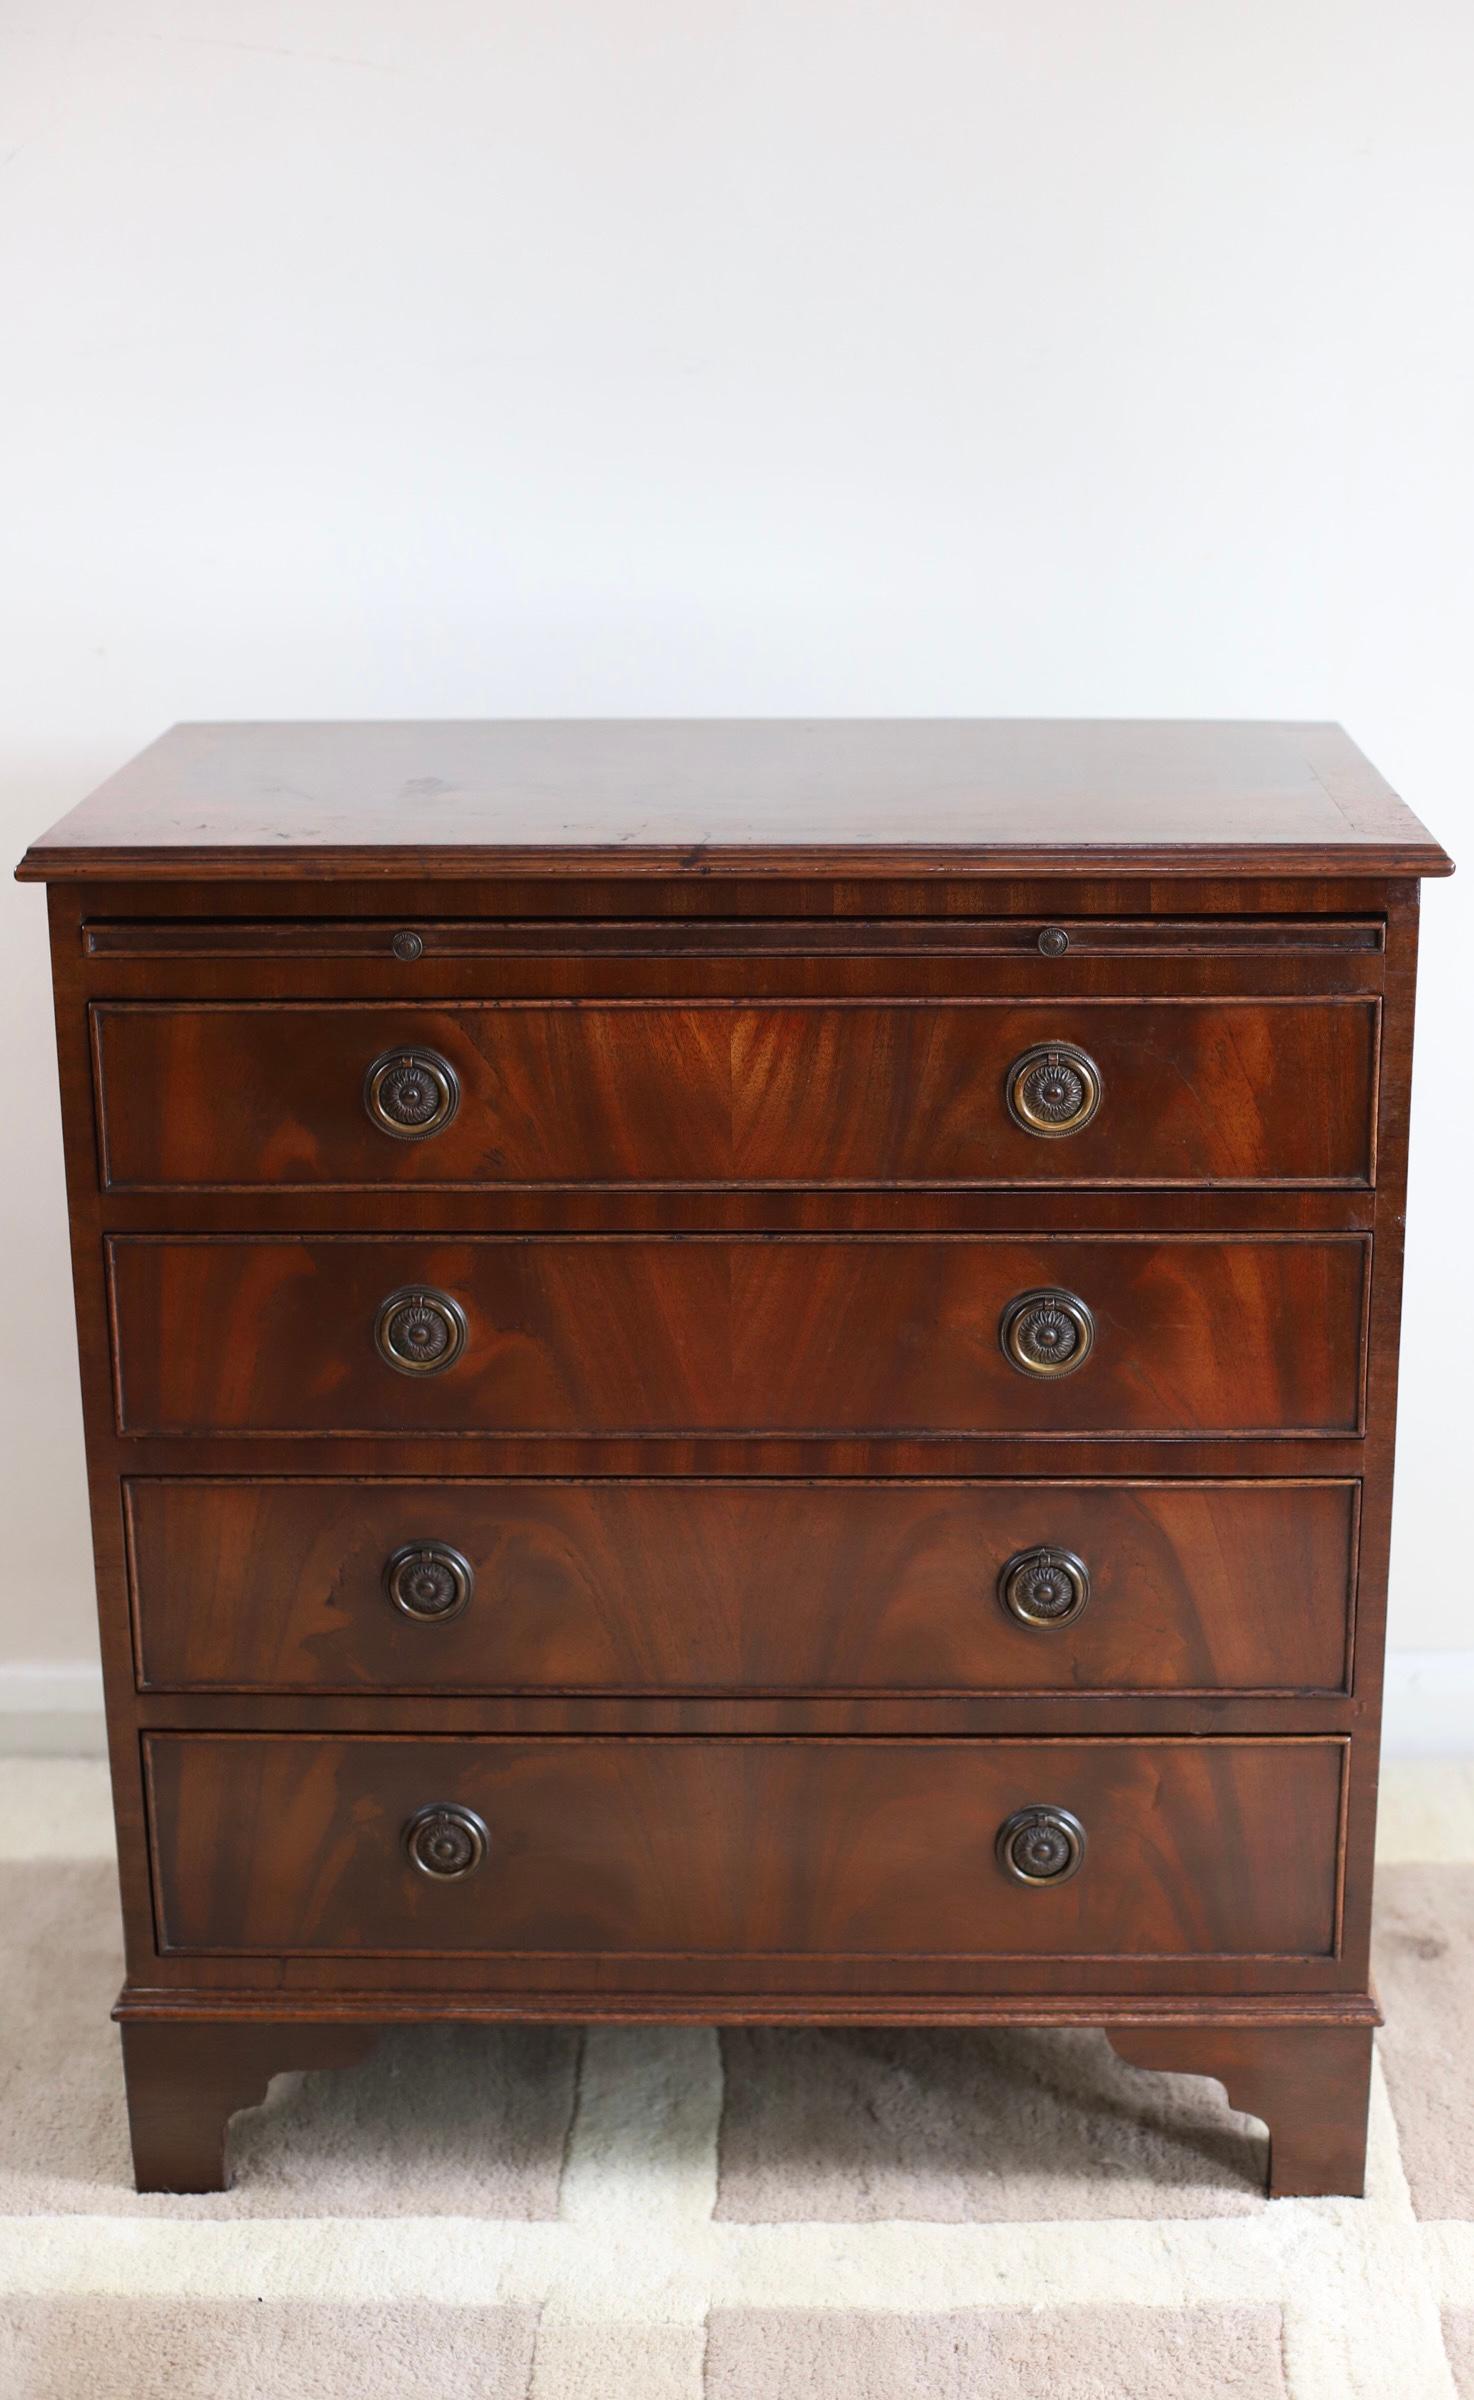 Beautiful George III style mahogany bachelor's chest of 4 drawers.
This is a lovely chest, that is full of age and character.
A rare quality piece with clean simple lines.
Solid, no loose joints and no woodworm.
Don't hesitate to contact me if